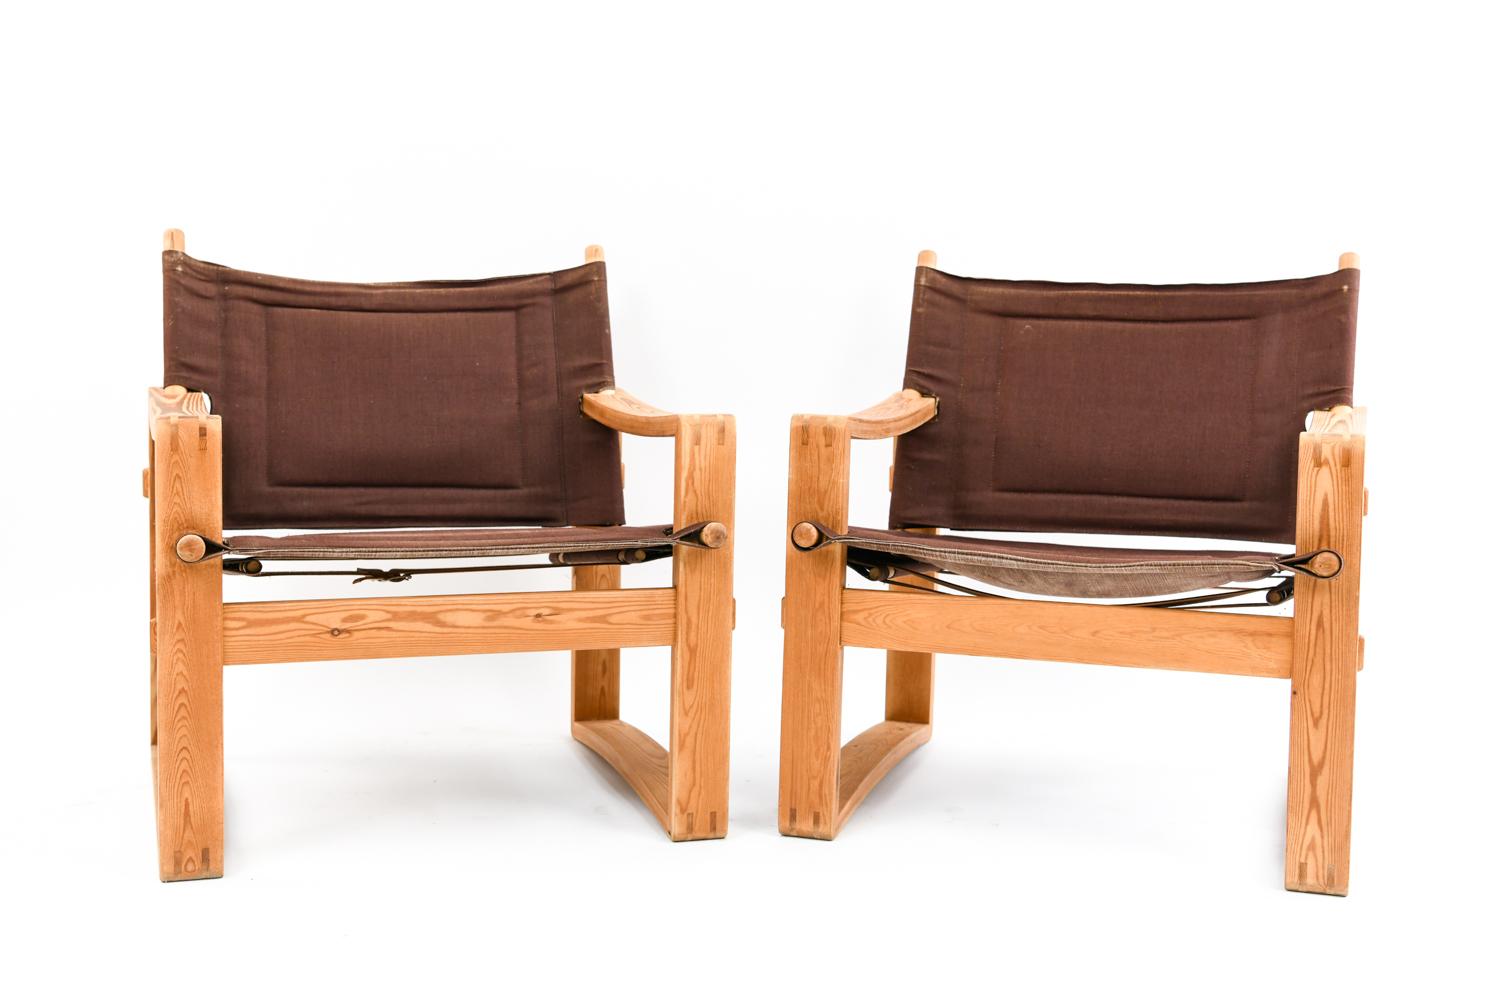 Bring a bit of safari inspired style to your home or office with this fantastic and rare pair of Borge Jensen safari sling armchairs, circa 1960s. Manufactured in Denmark by Bernstorffsminde Møbelfabrik A/S featuring canvas upholstery sitting on